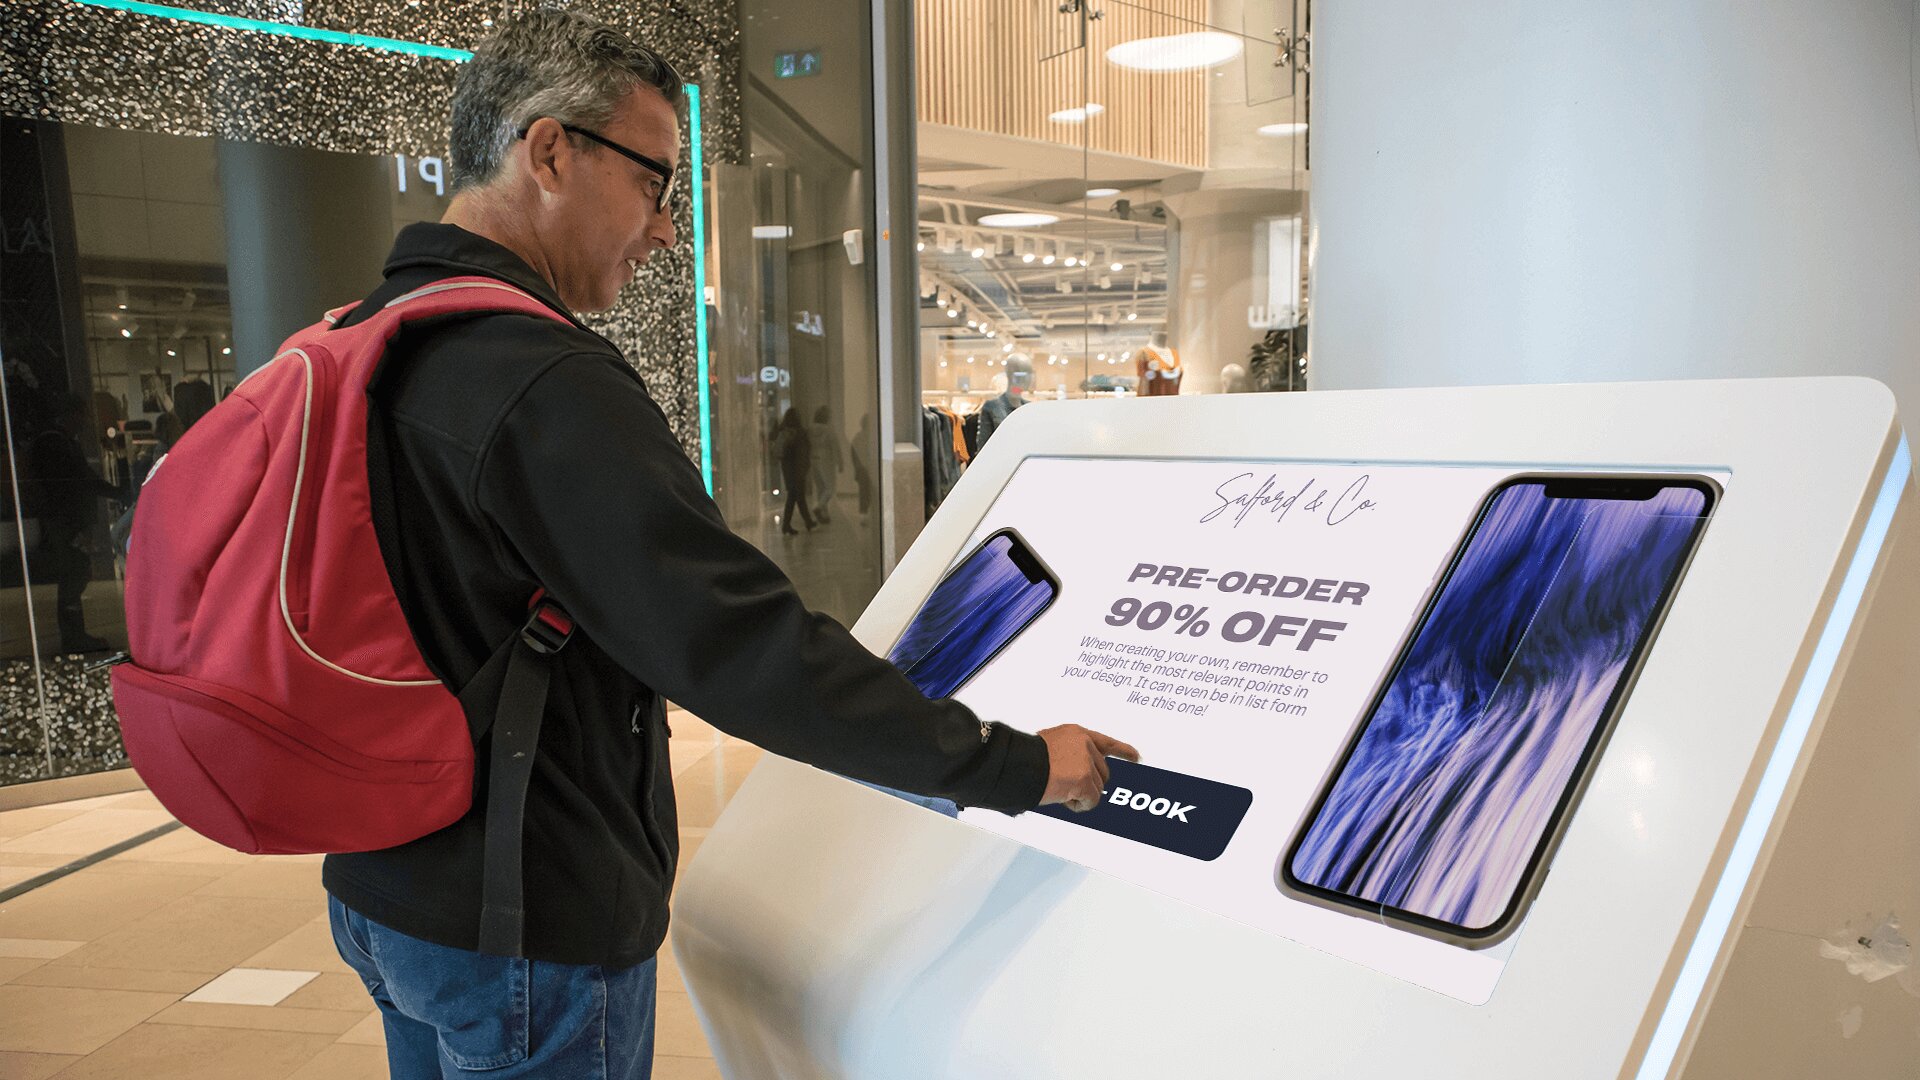 A man in a black sweatshirt interacts with a kiosk showing the digital product catalogue of newly-launched smartphones.